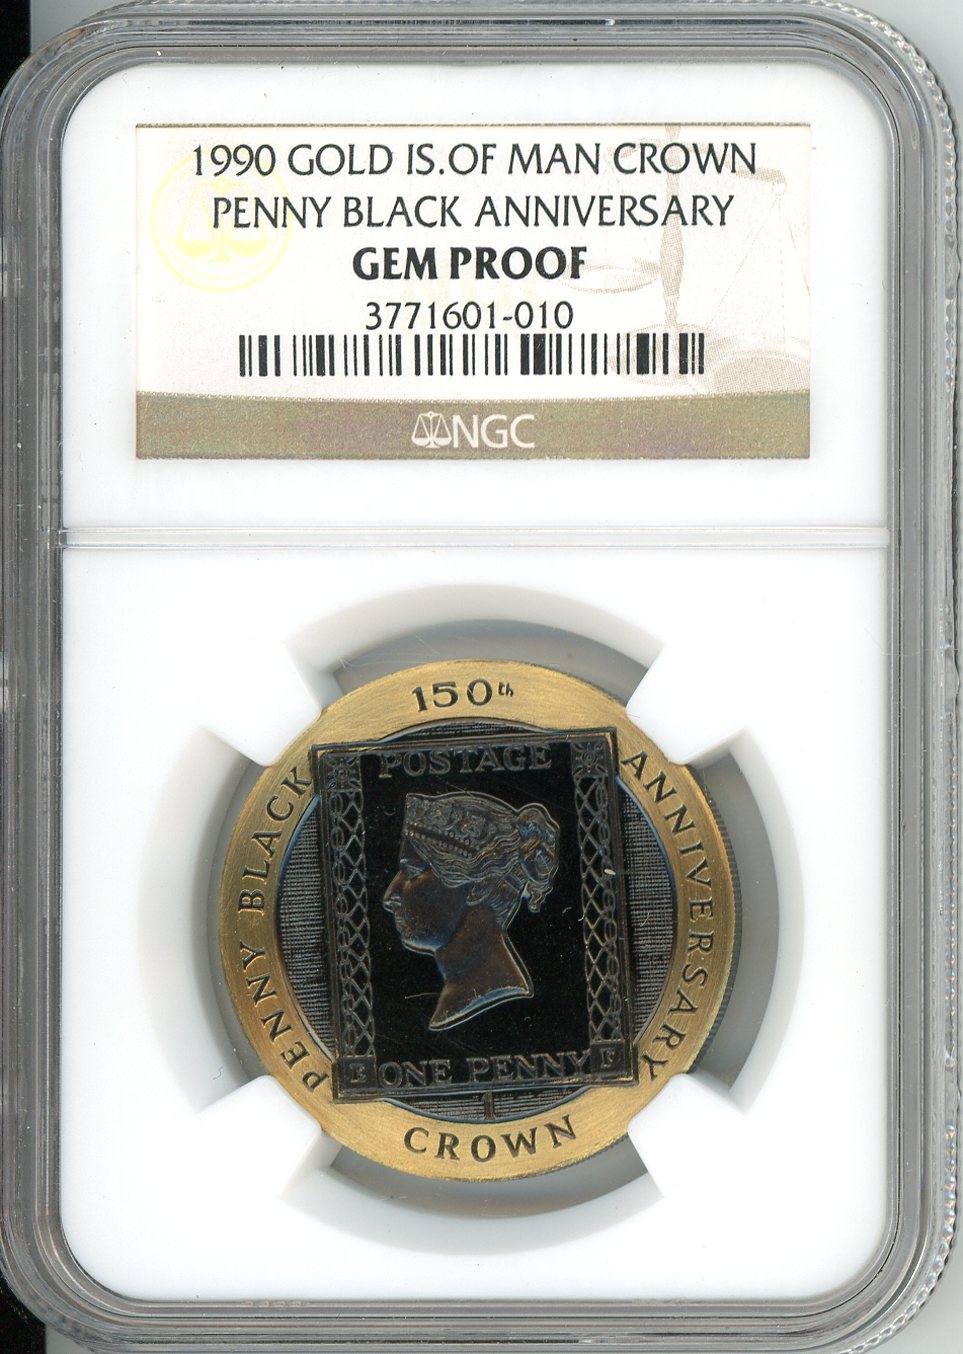 Thumbnail for 1990 Isle of Man 1oz Coloured Gold Proof Penny Black 150th Anniversary NCGS Slabbed Gem Proof